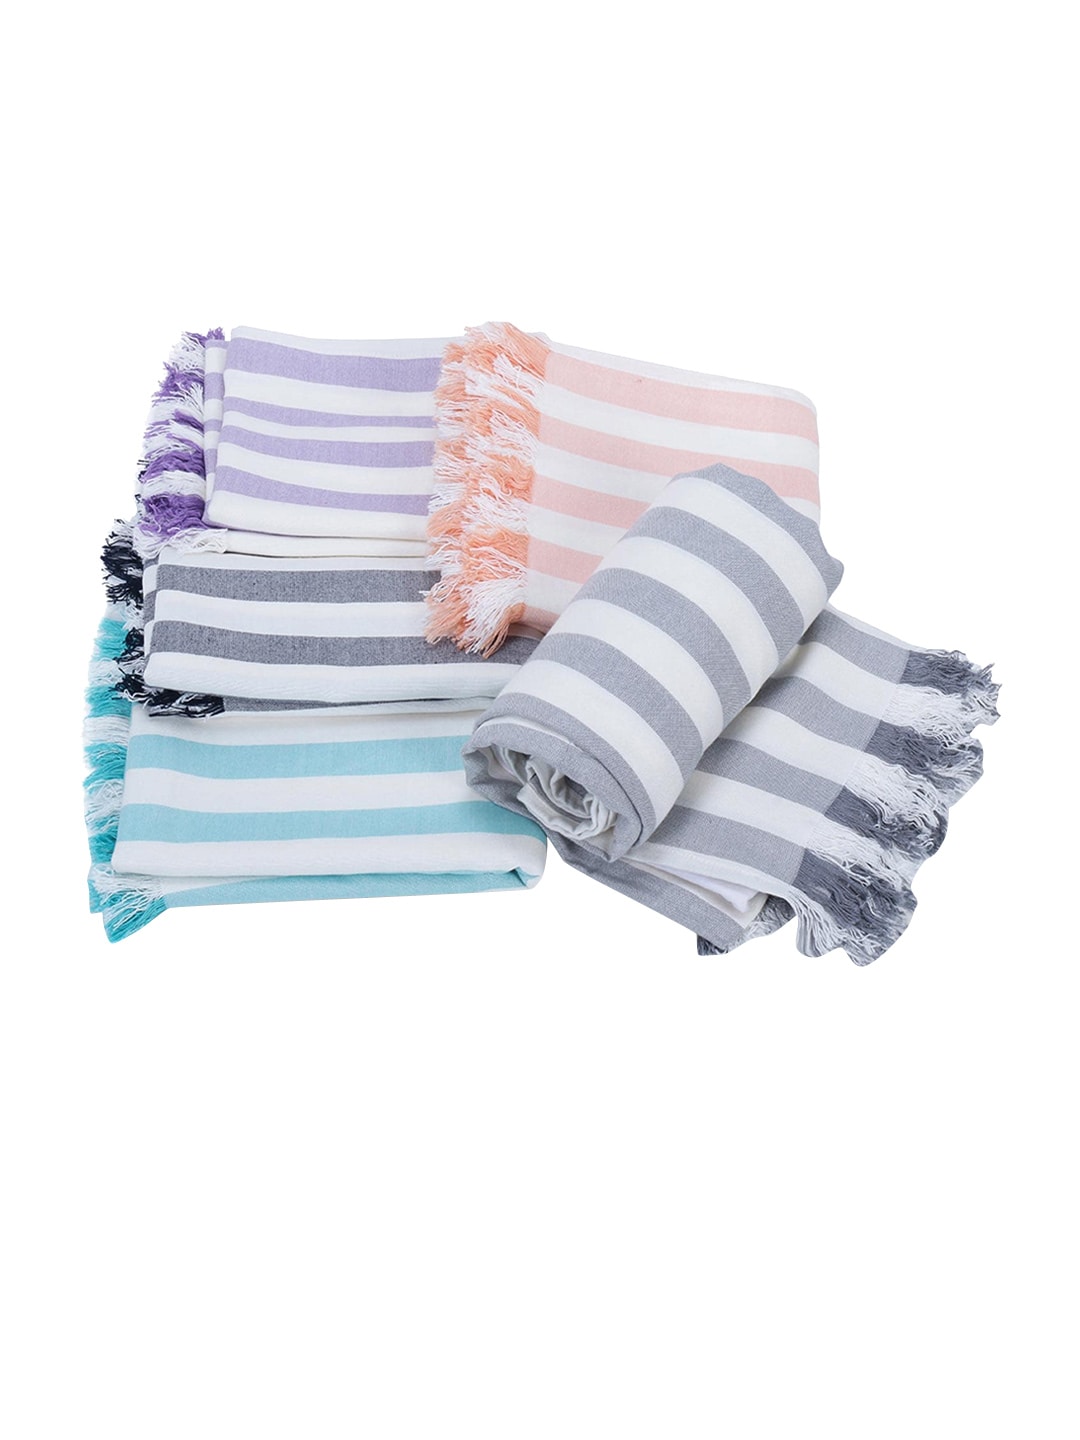 haus & kinder Peach Coloured Striped 250 GSM Bamboo Bath Towels Price in India